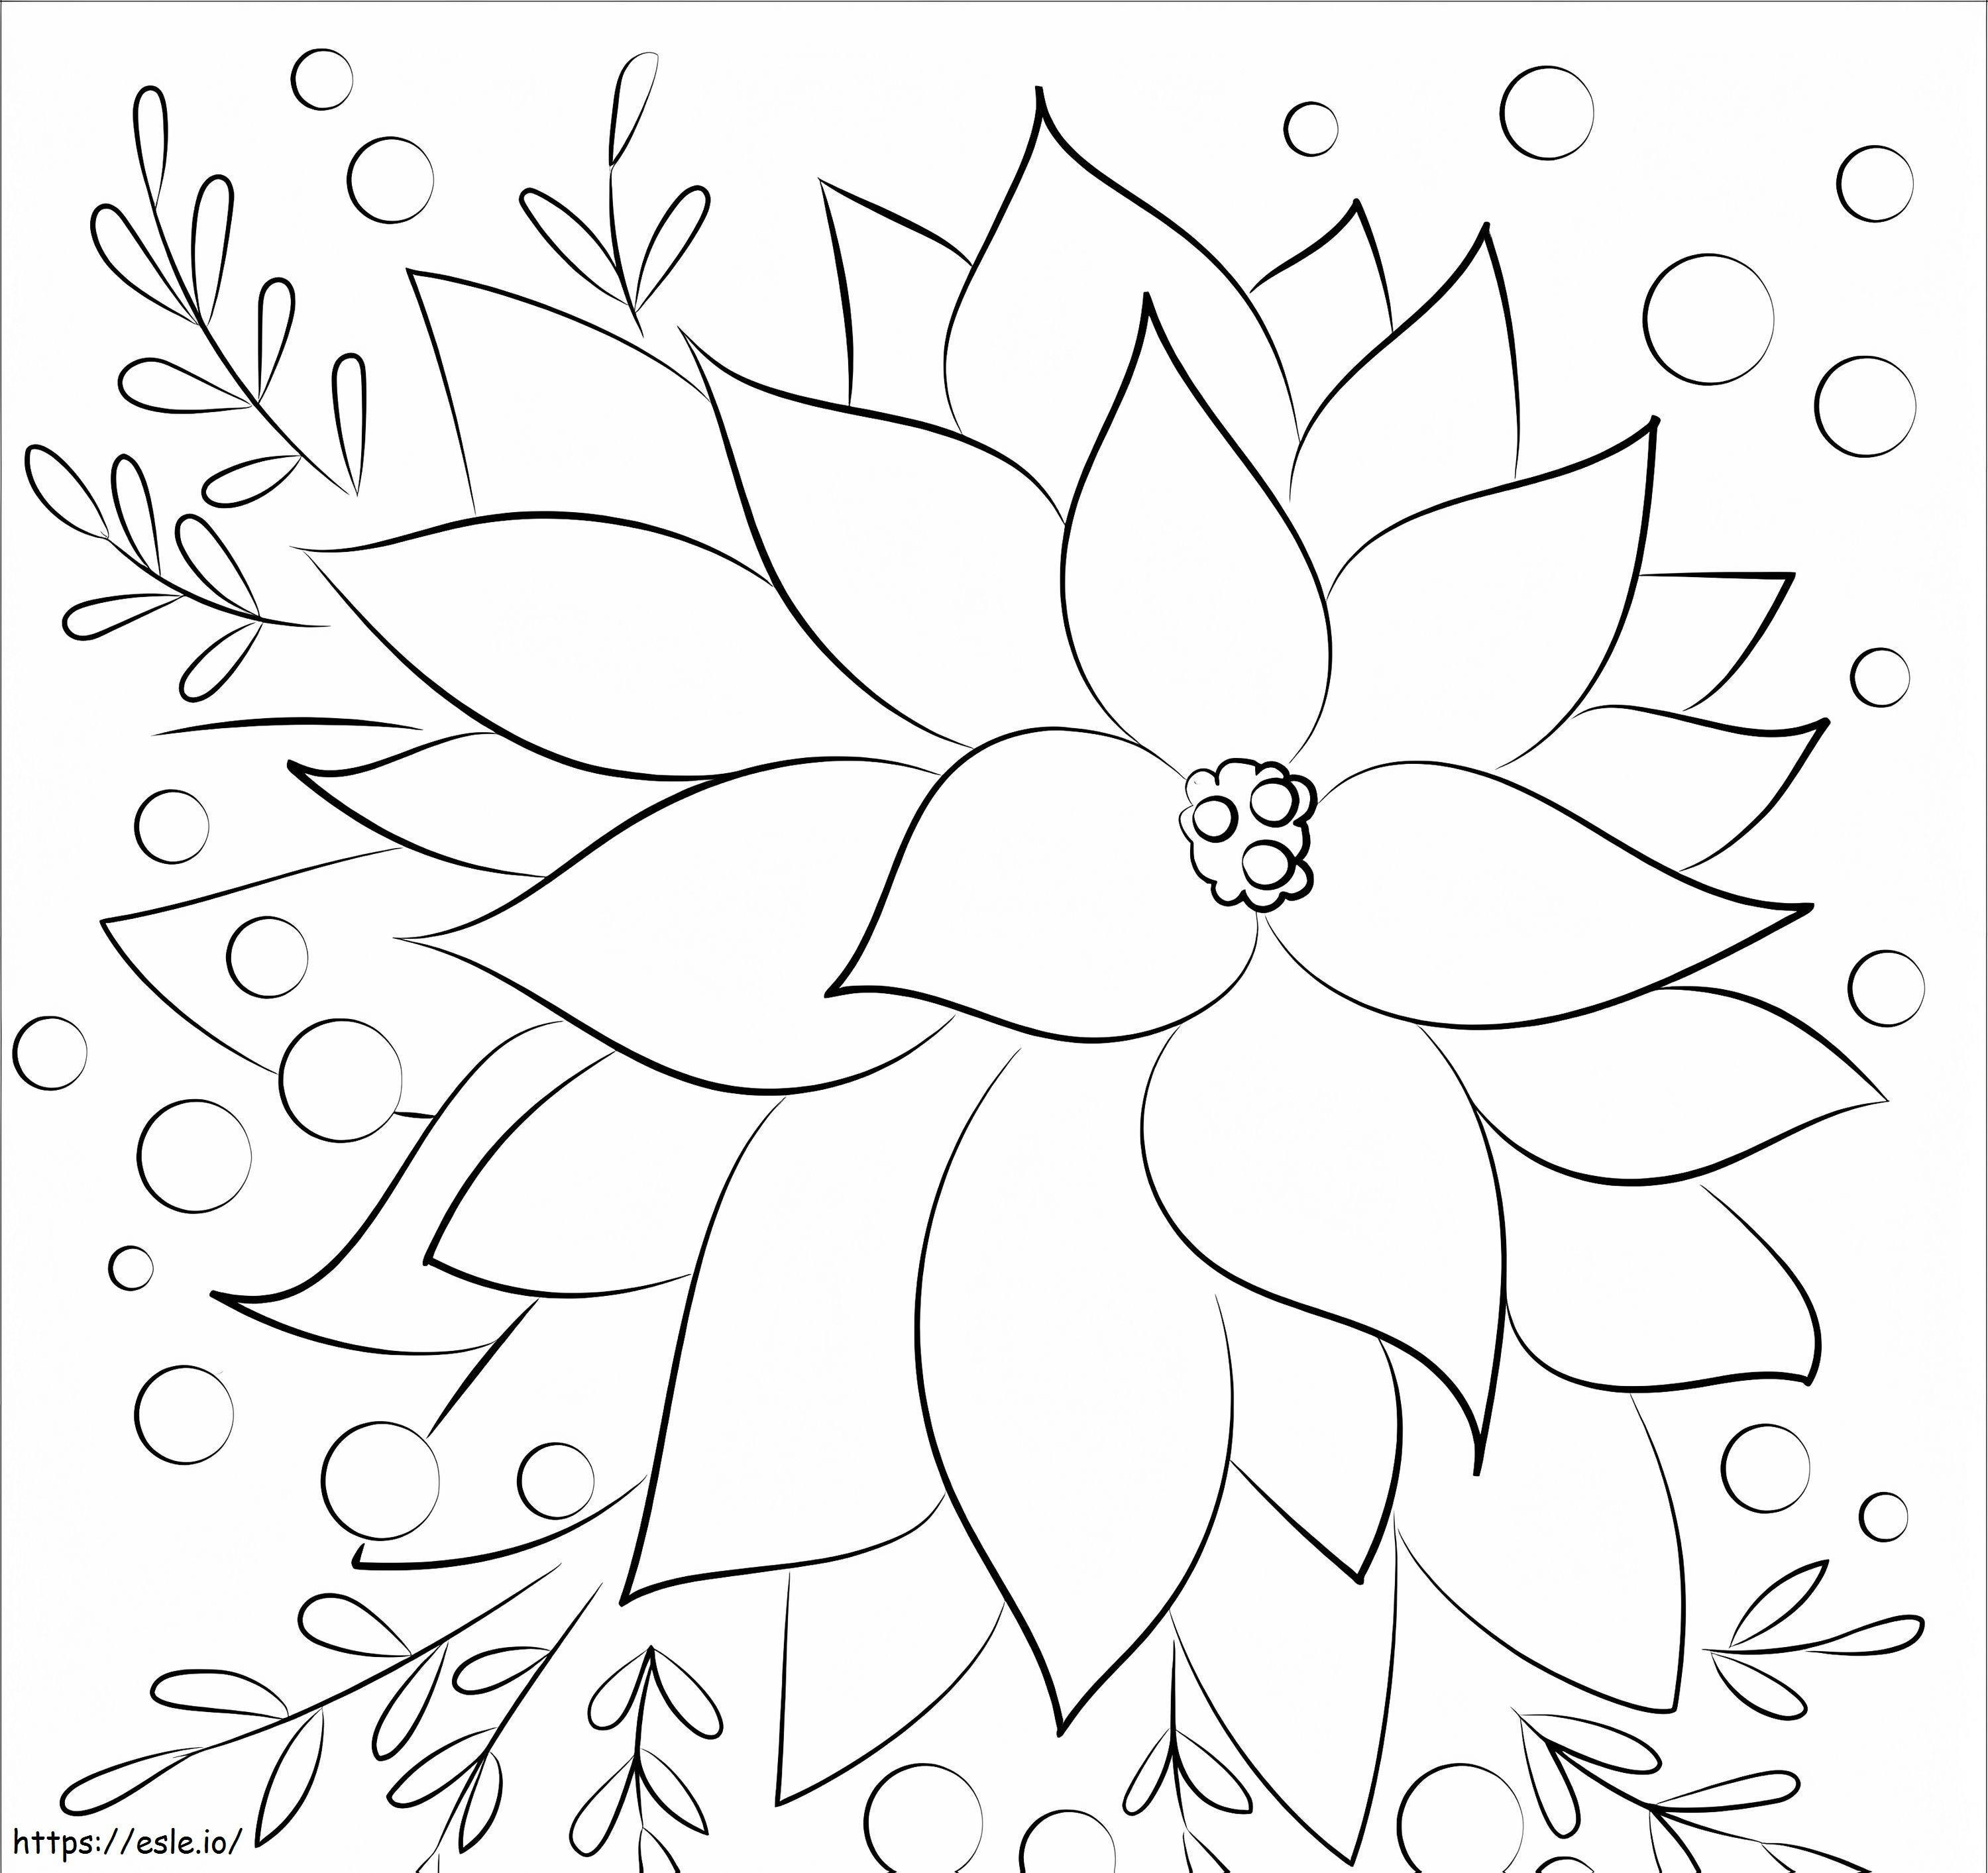 Normal Poinsettia coloring page